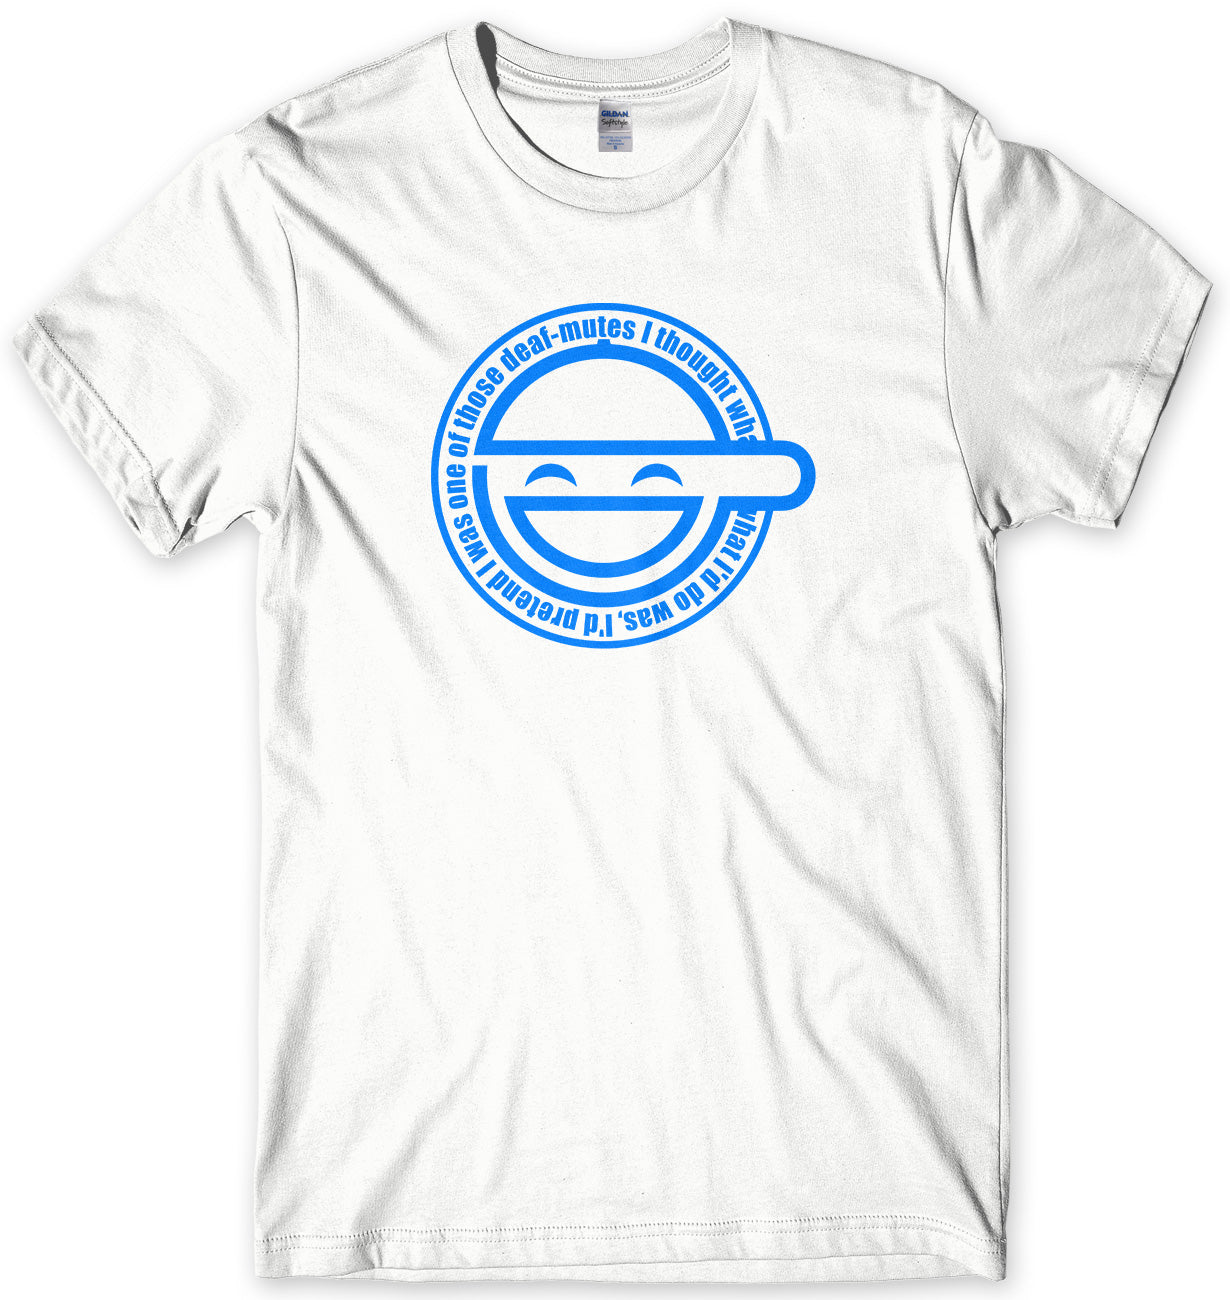 LAUGHING MAN - INSPIRED BY GHOST IN THE SHELL MENS UNISEX T-SHIRT